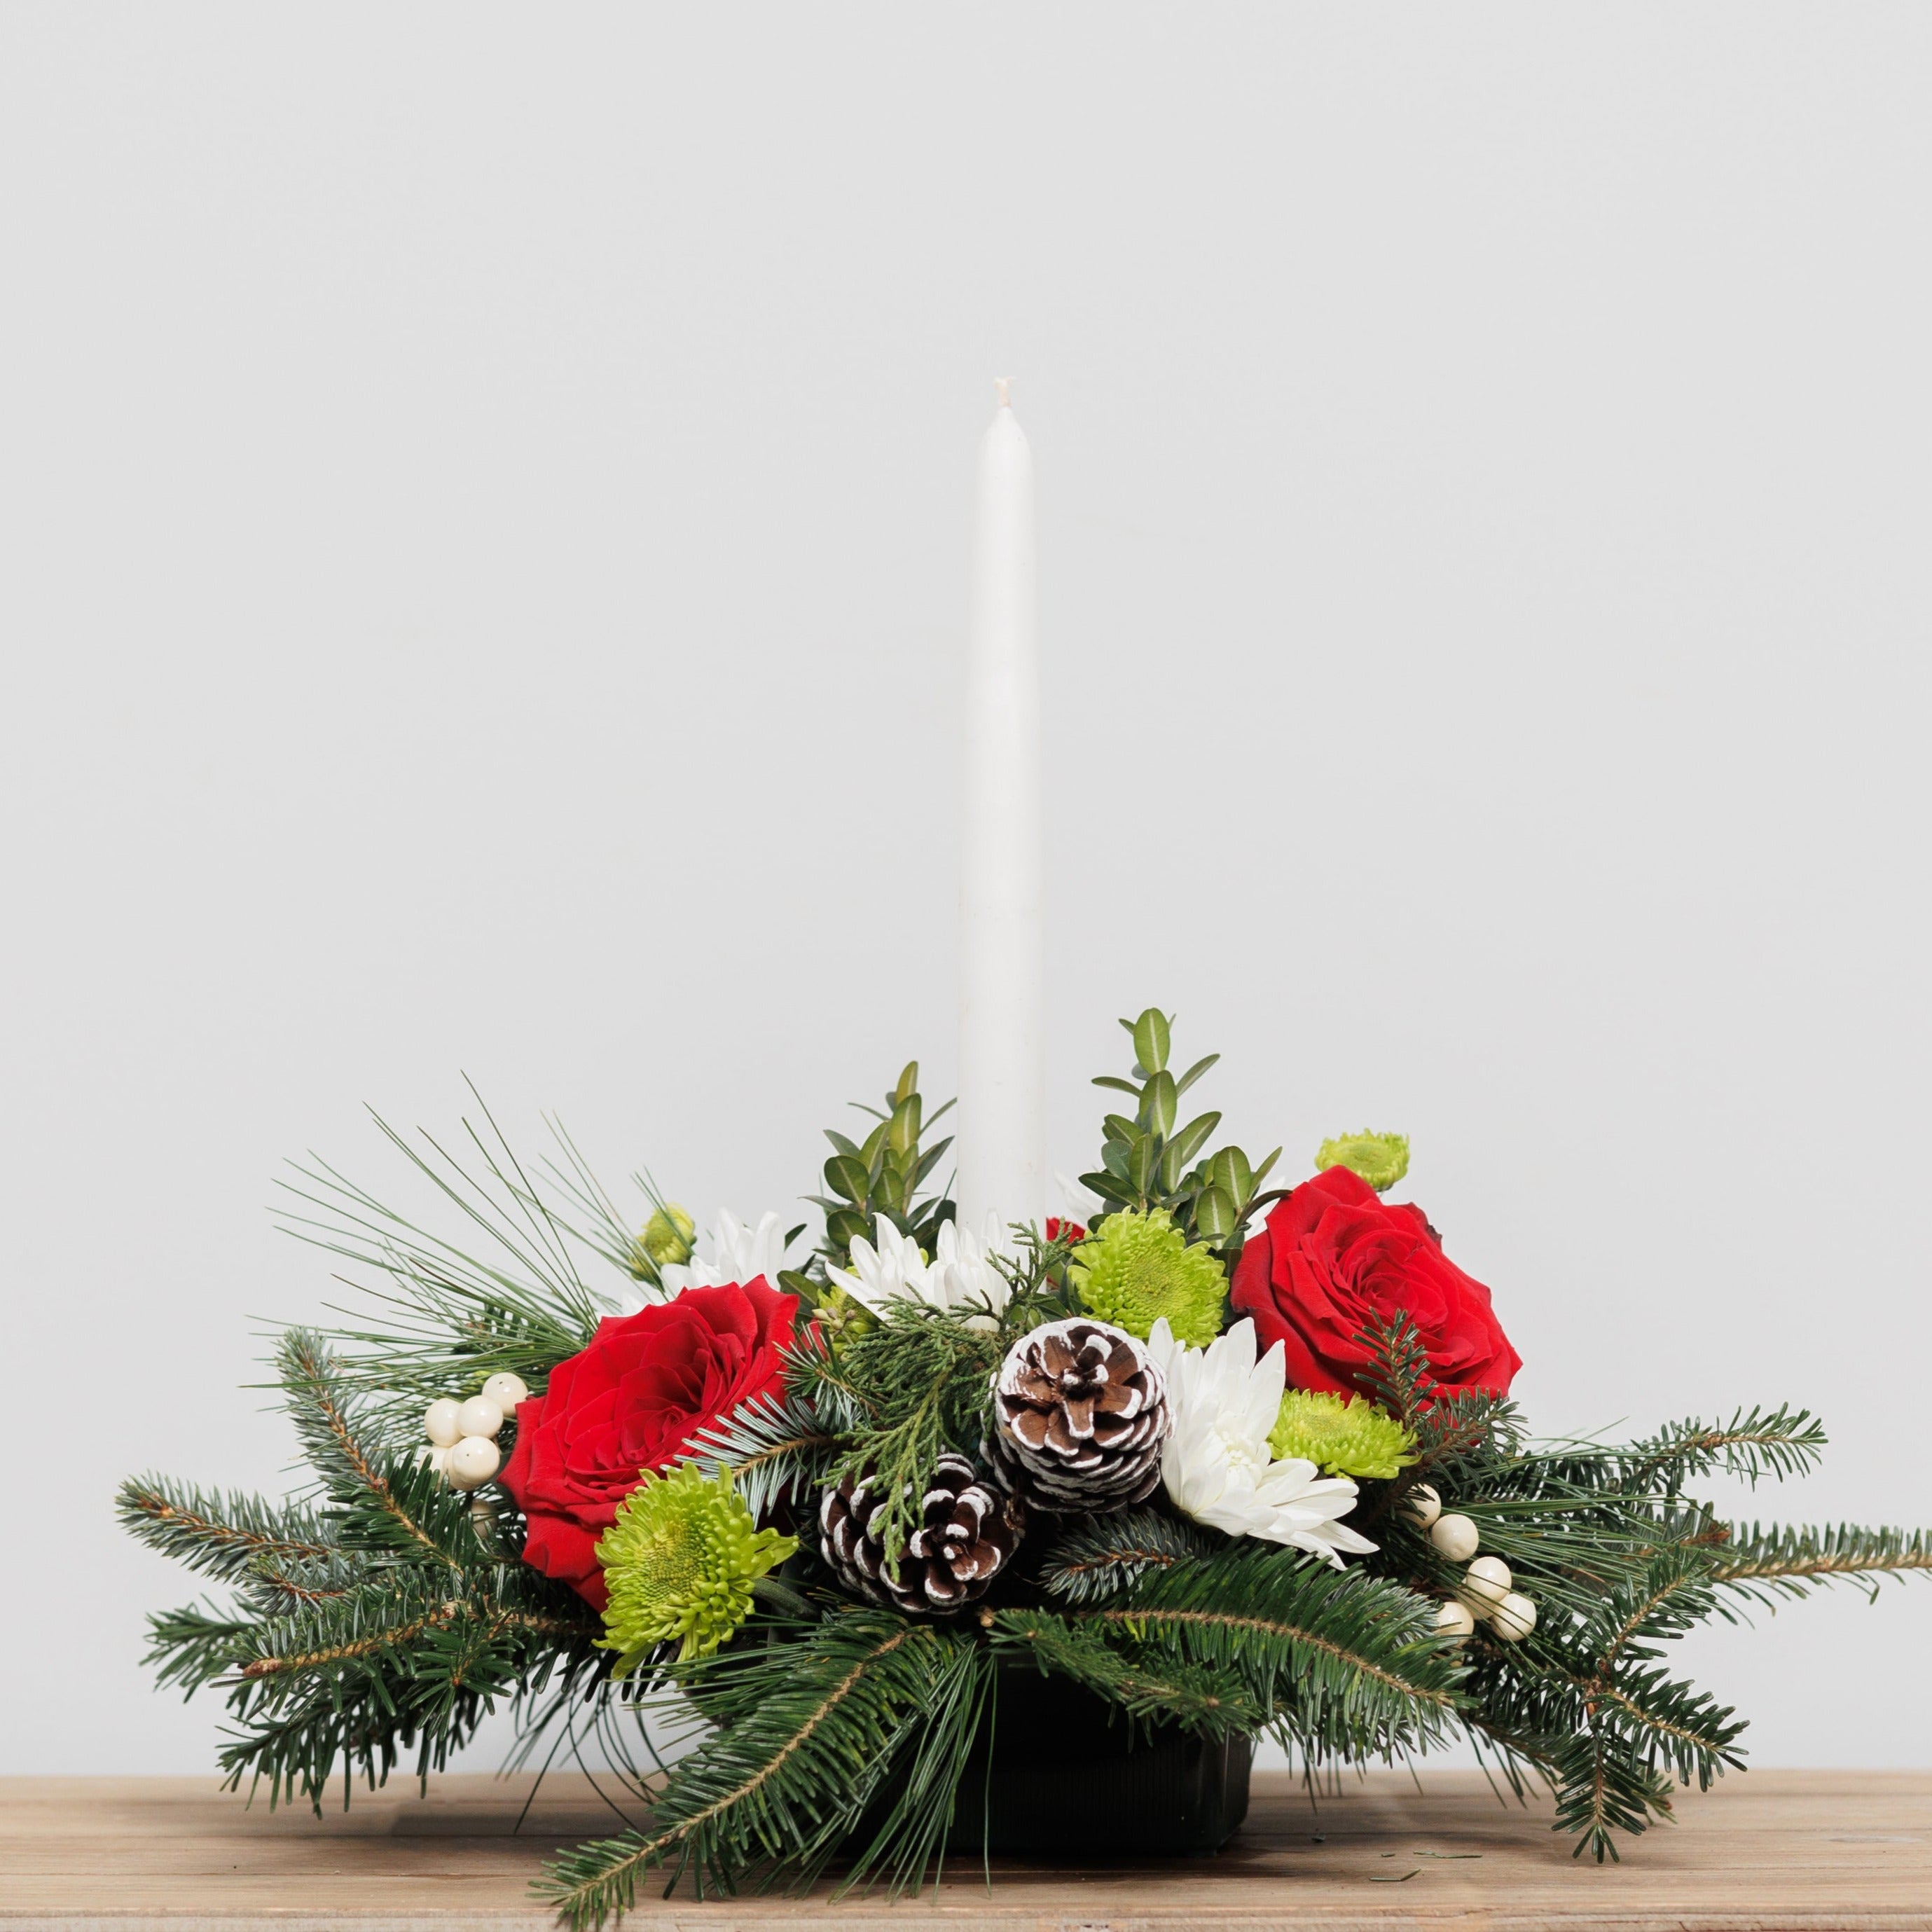 A Christmas centerpiece with red and white flowers, green mums and a white taper candle.